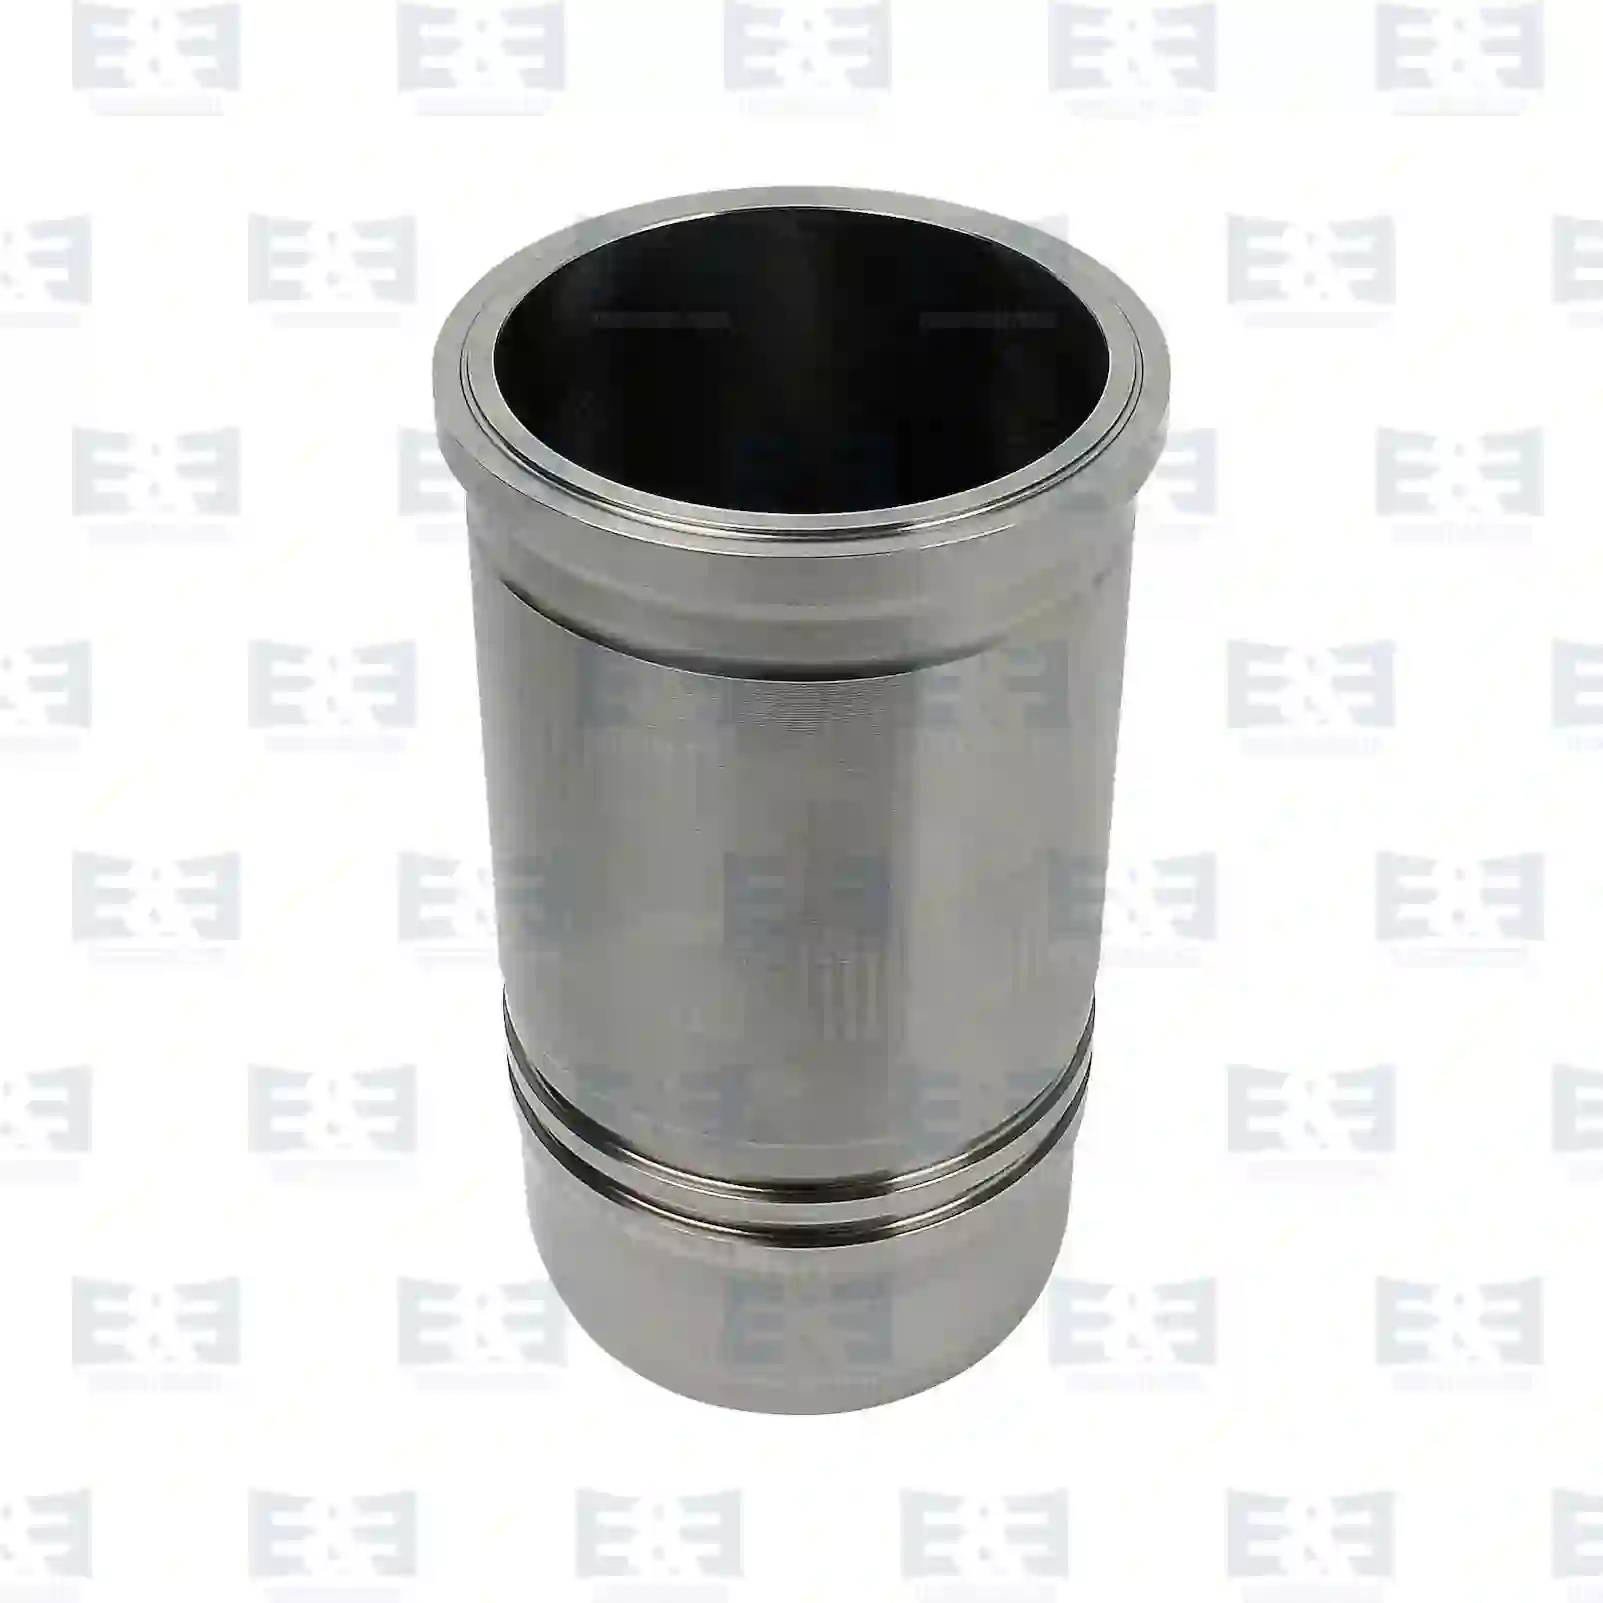 Cylinder liner, without seal rings, 2E2209885, 7420820662, 20723422, 20737507, 20820662, 20924026, 21719825, 3809305 ||  2E2209885 E&E Truck Spare Parts | Truck Spare Parts, Auotomotive Spare Parts Cylinder liner, without seal rings, 2E2209885, 7420820662, 20723422, 20737507, 20820662, 20924026, 21719825, 3809305 ||  2E2209885 E&E Truck Spare Parts | Truck Spare Parts, Auotomotive Spare Parts